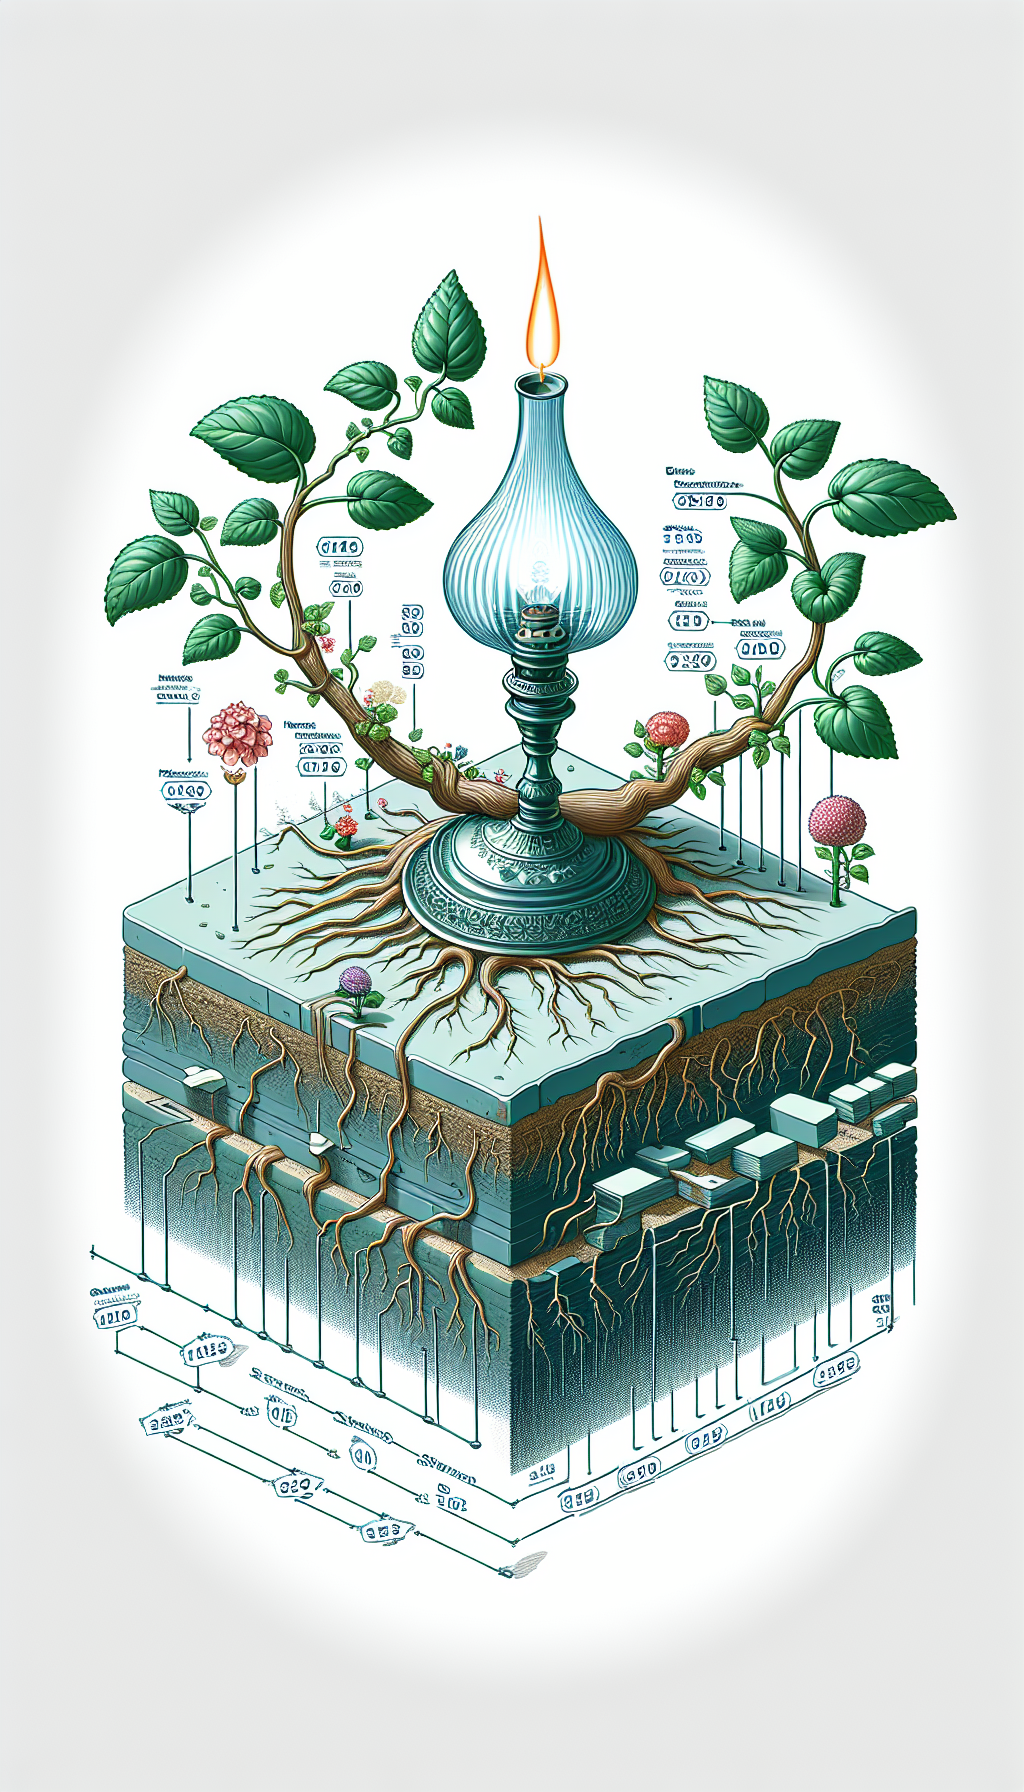 An intricate cross-section of an antique oil lamp is depicted as a flourishing infographic vine, with roots labeled 'Base' and 'Wick' at each end. As the vine ascends, blooming flowers and leaves represent key factors like rarity, age, and condition, intertwined with shimmering price tags, symbolizing the lamp's escalating value through its craftsmanship and historical significance.